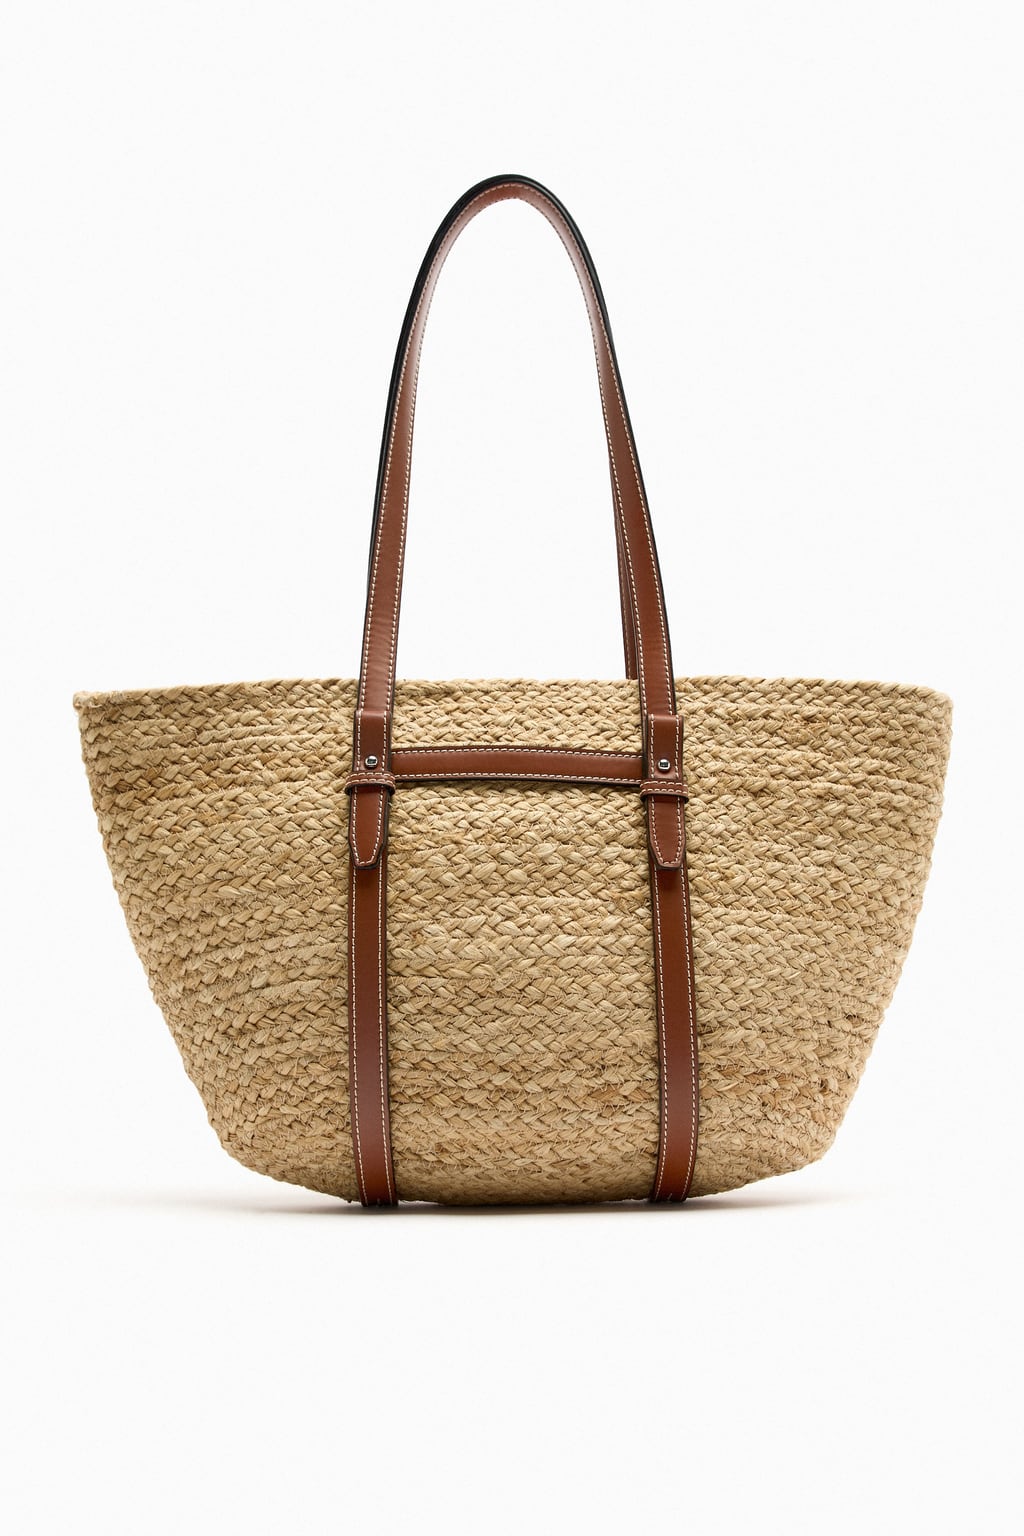 My ultimate summer handbag. What's your go-to summer purse? Bag